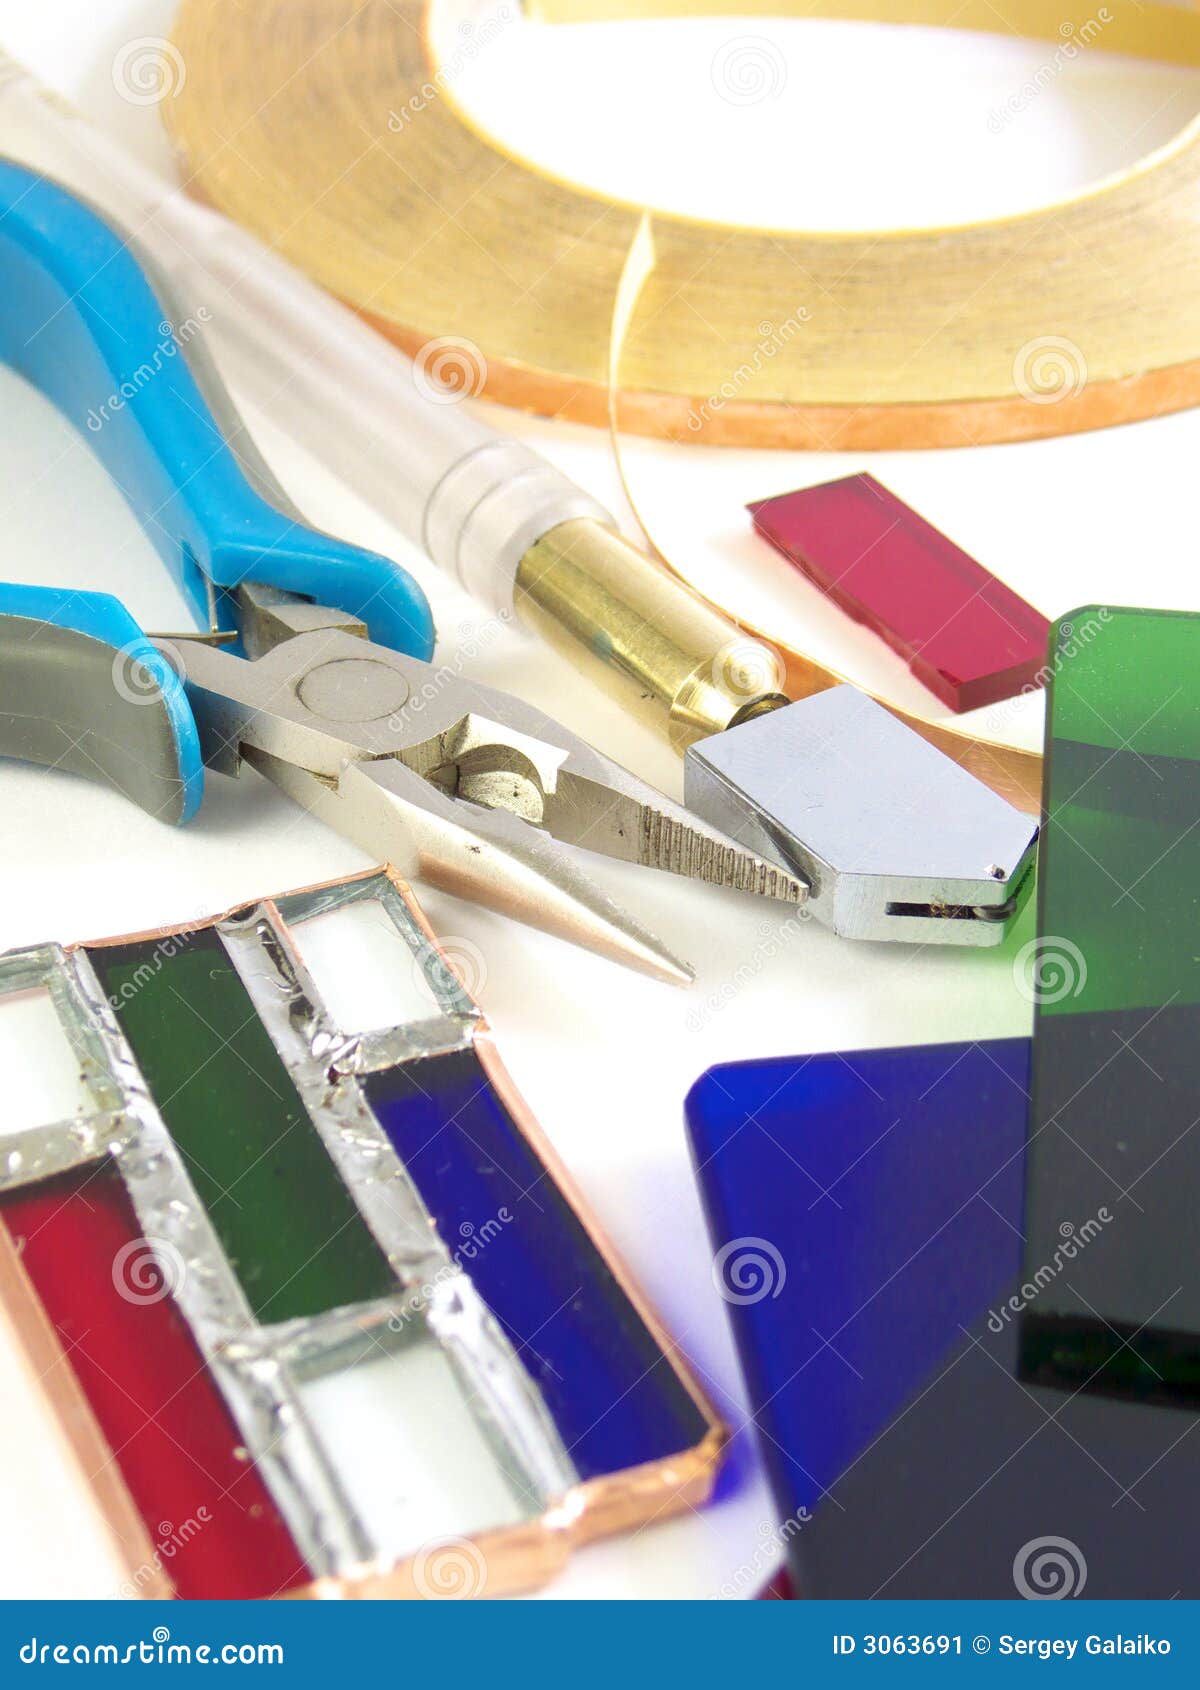 tools for stained-glass